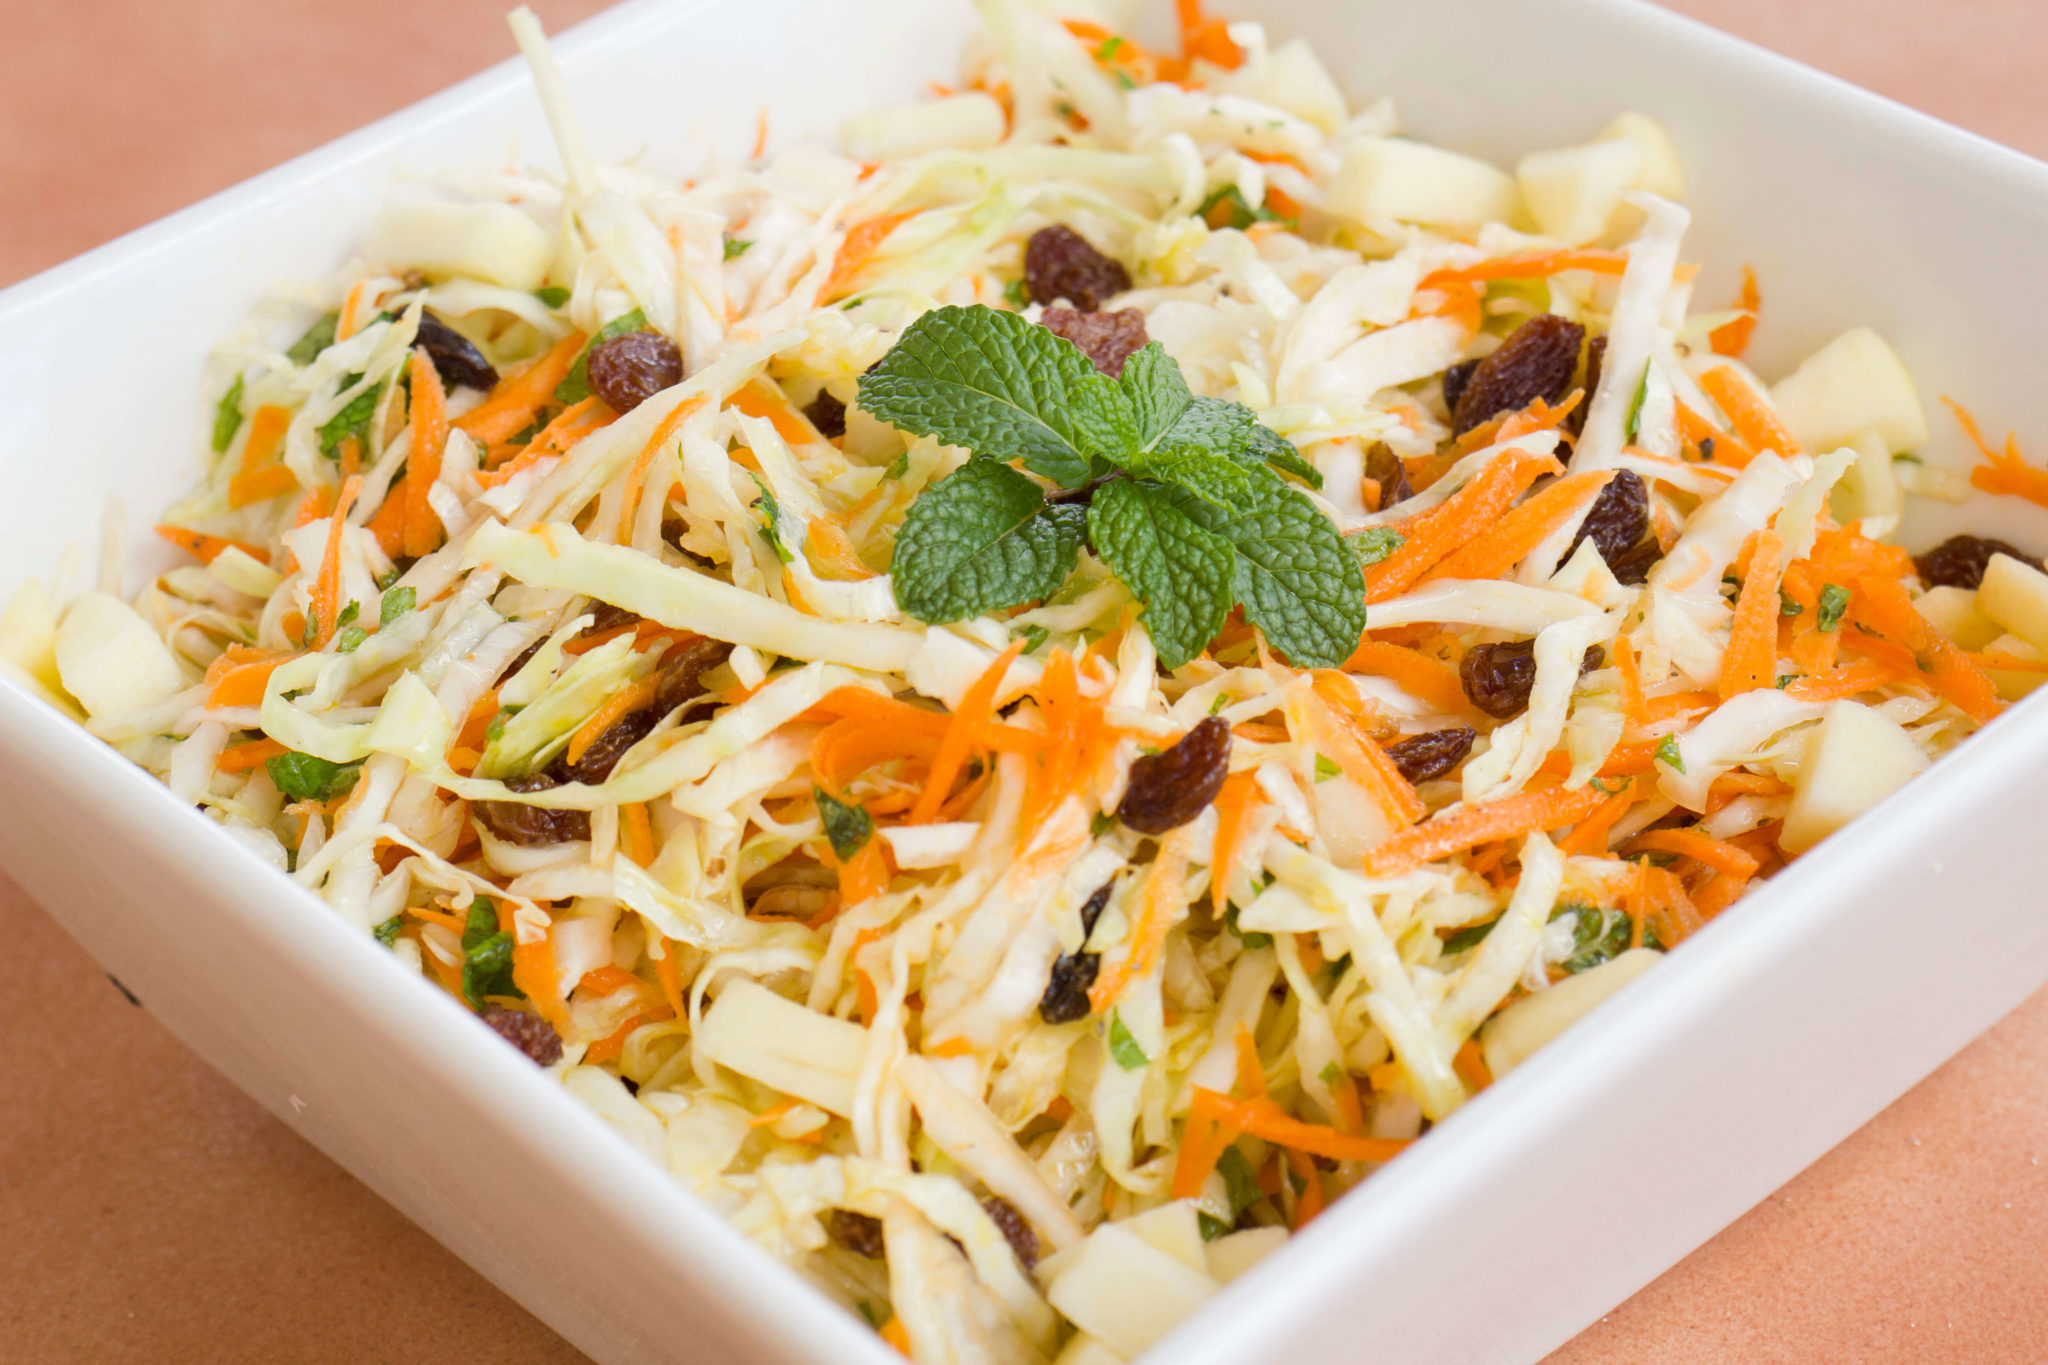 Coleslaw with cardamom and mint